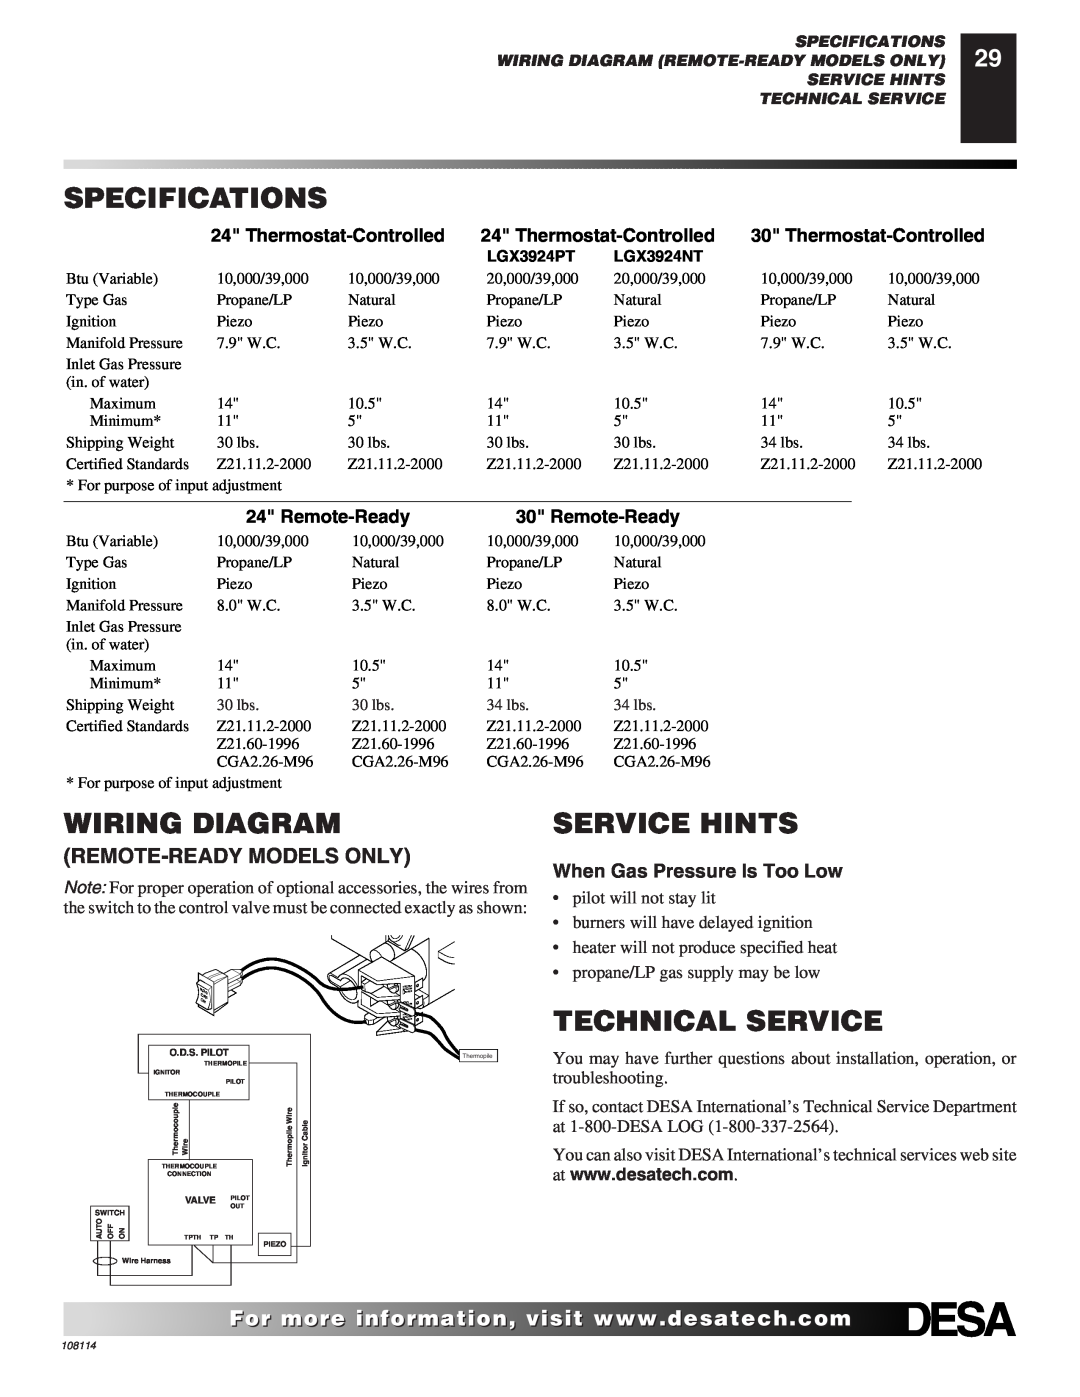 Desa INTERNATIONAL UNVENTED (VENT-FREE) GAS LOG HEATER Specifications, Wiring Diagram, Service Hints, Technical Service 